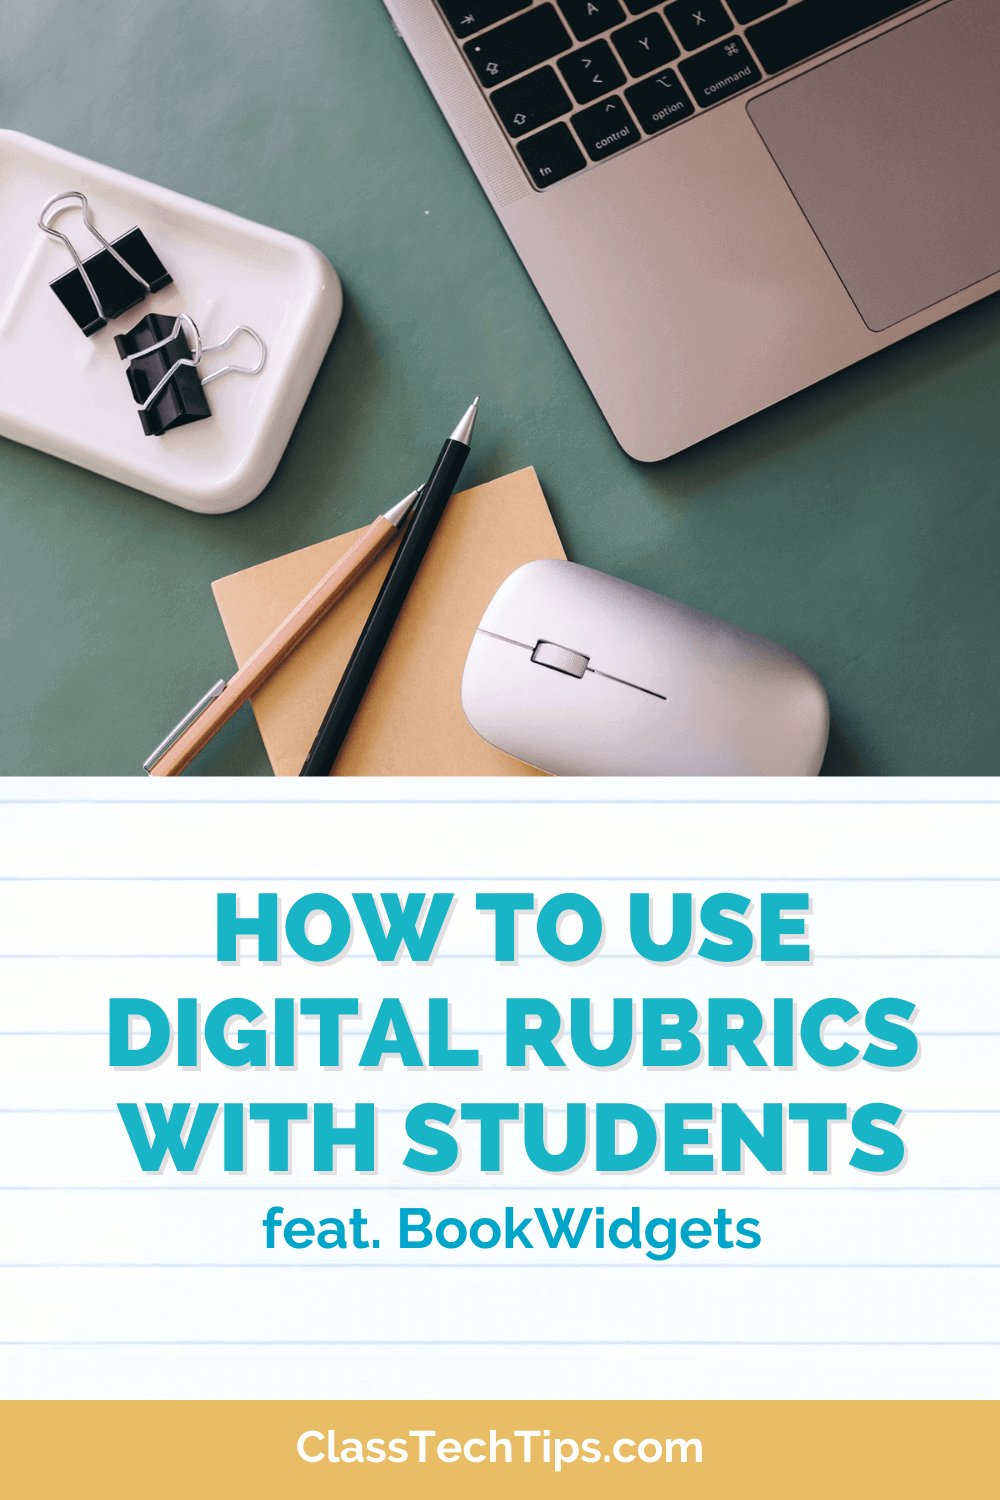 Desk with essential tools including a laptop, representing the topic of the blog post on how to effectively use digital rubrics with students.